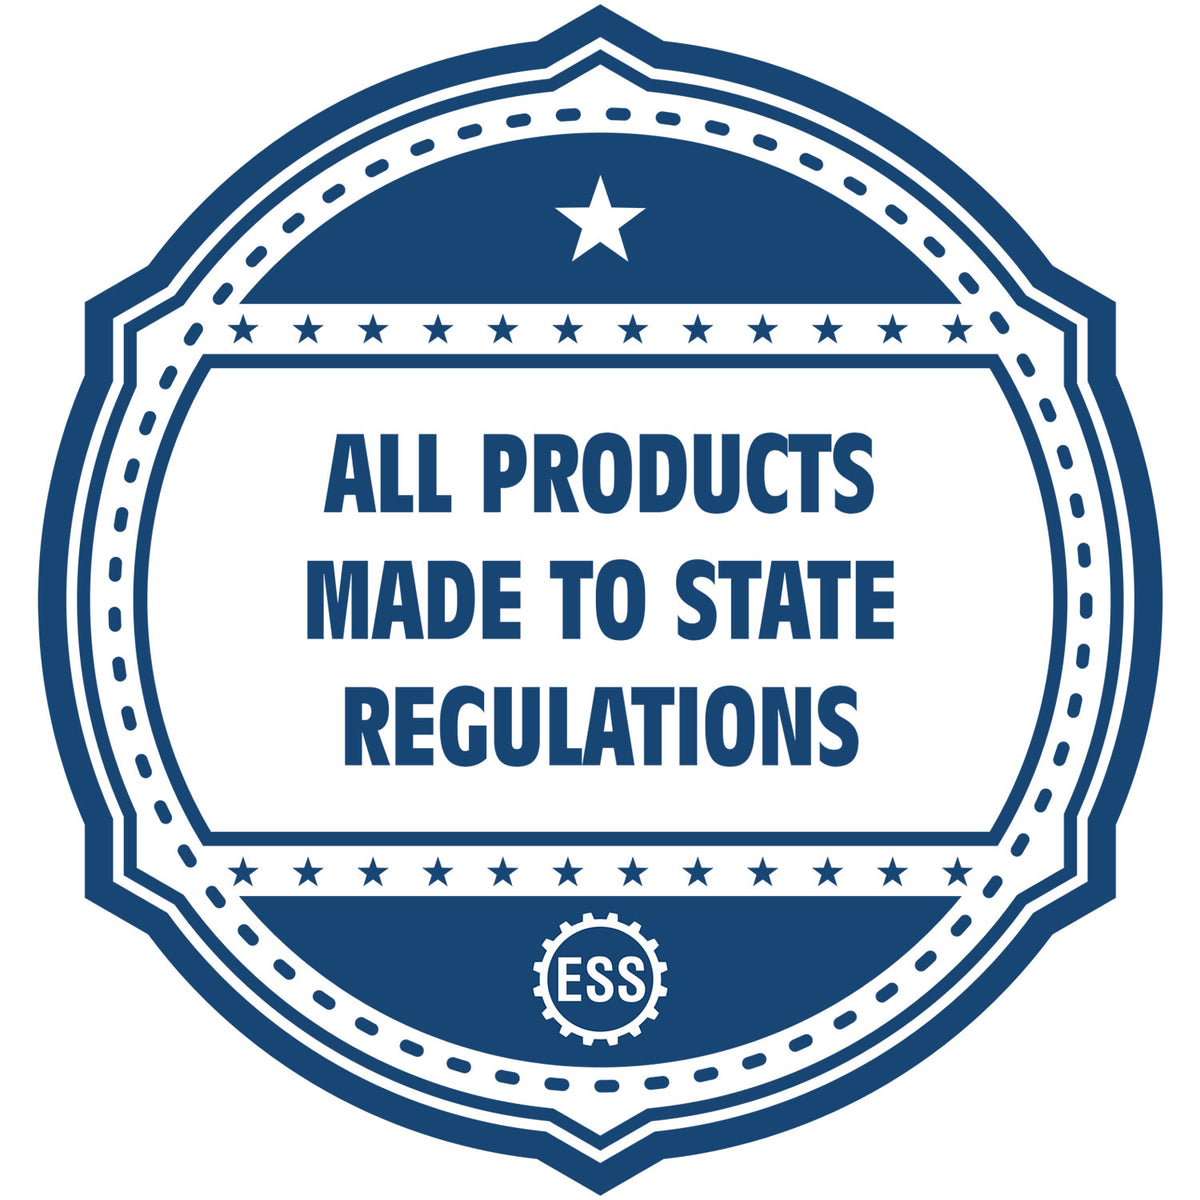 A blue icon or badge for the Hybrid Oklahoma Landscape Architect Seal showing that this product is made in compliance with state regulations.